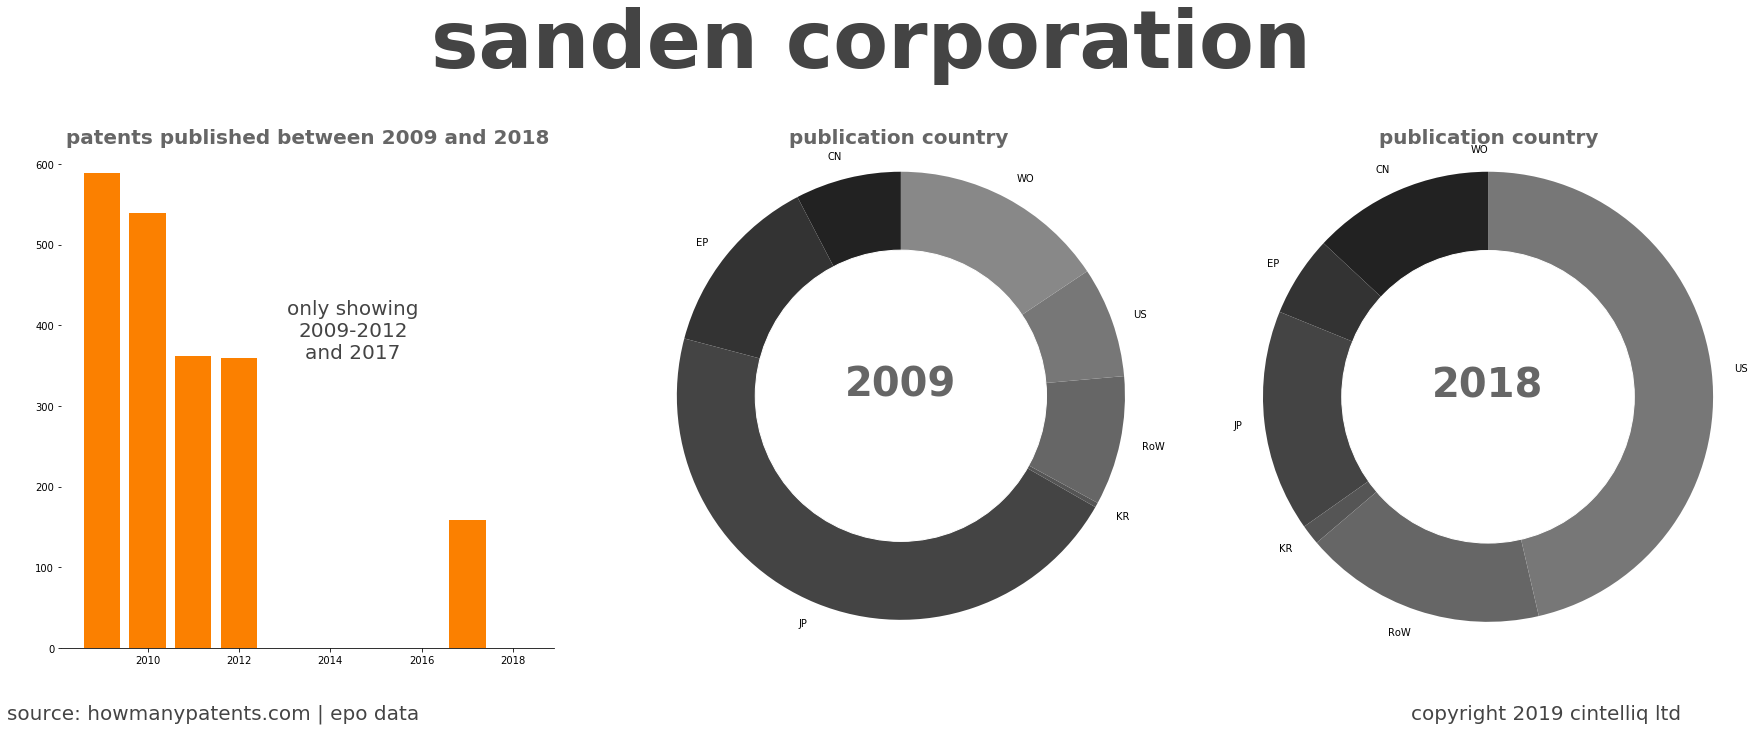 summary of patents for Sanden Corporation